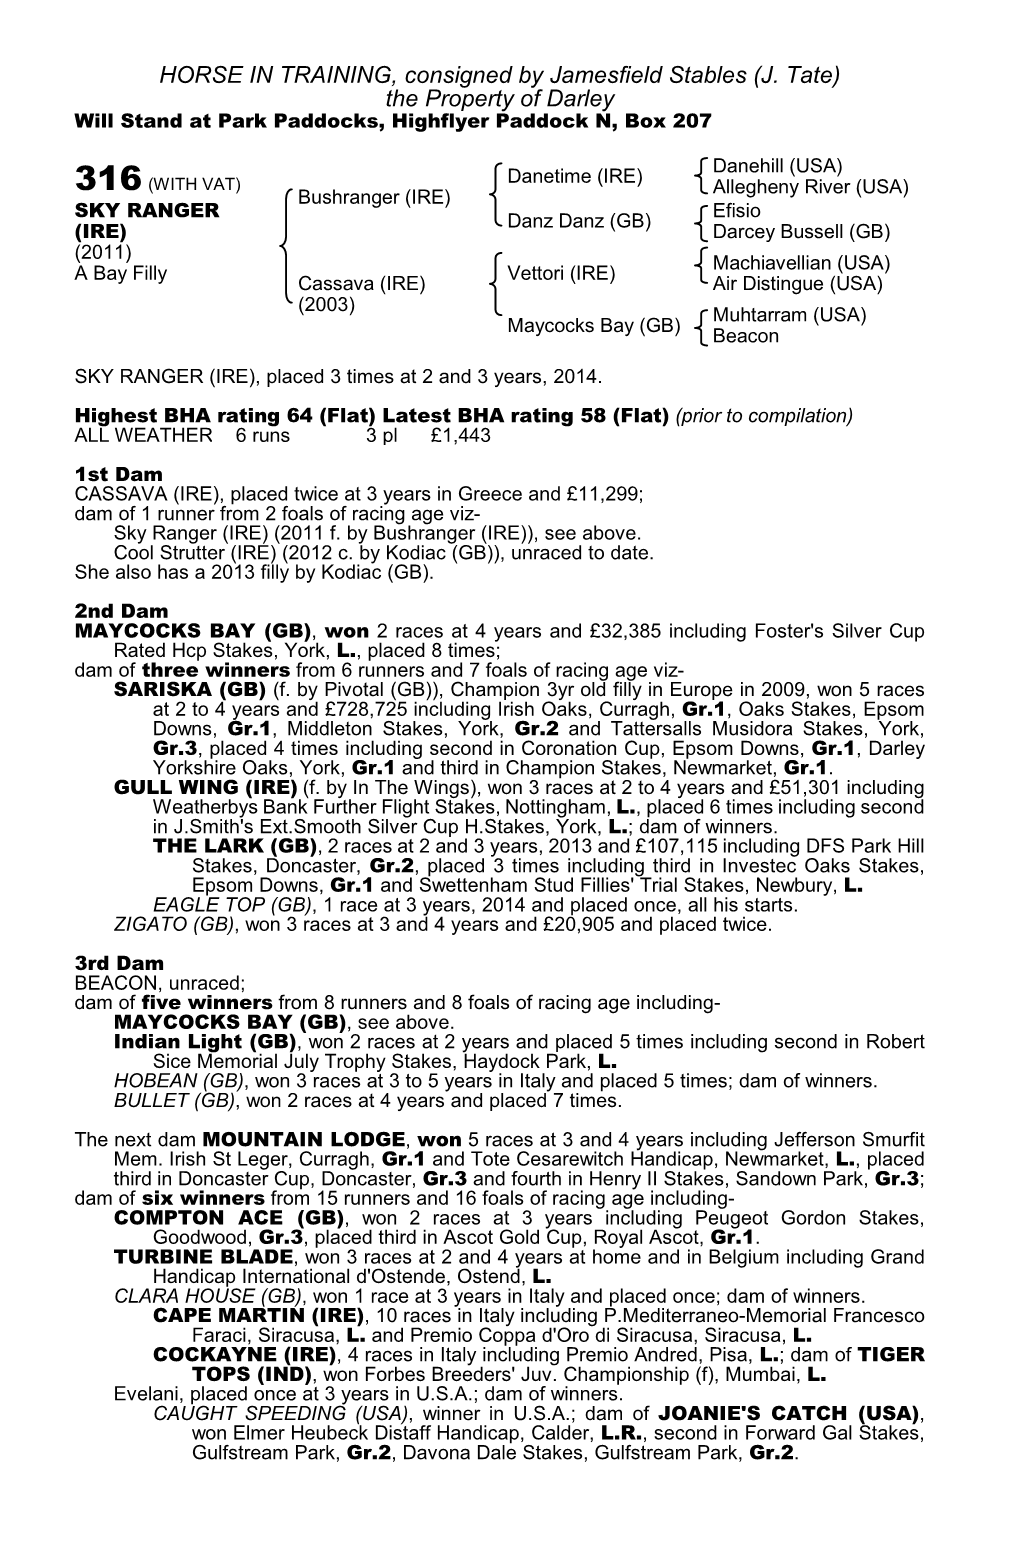 HORSE in TRAINING, Consigned by Jamesfield Stables (J. Tate) the Property of Darley Will Stand at Park Paddocks, Highflyer Paddock N, Box 207